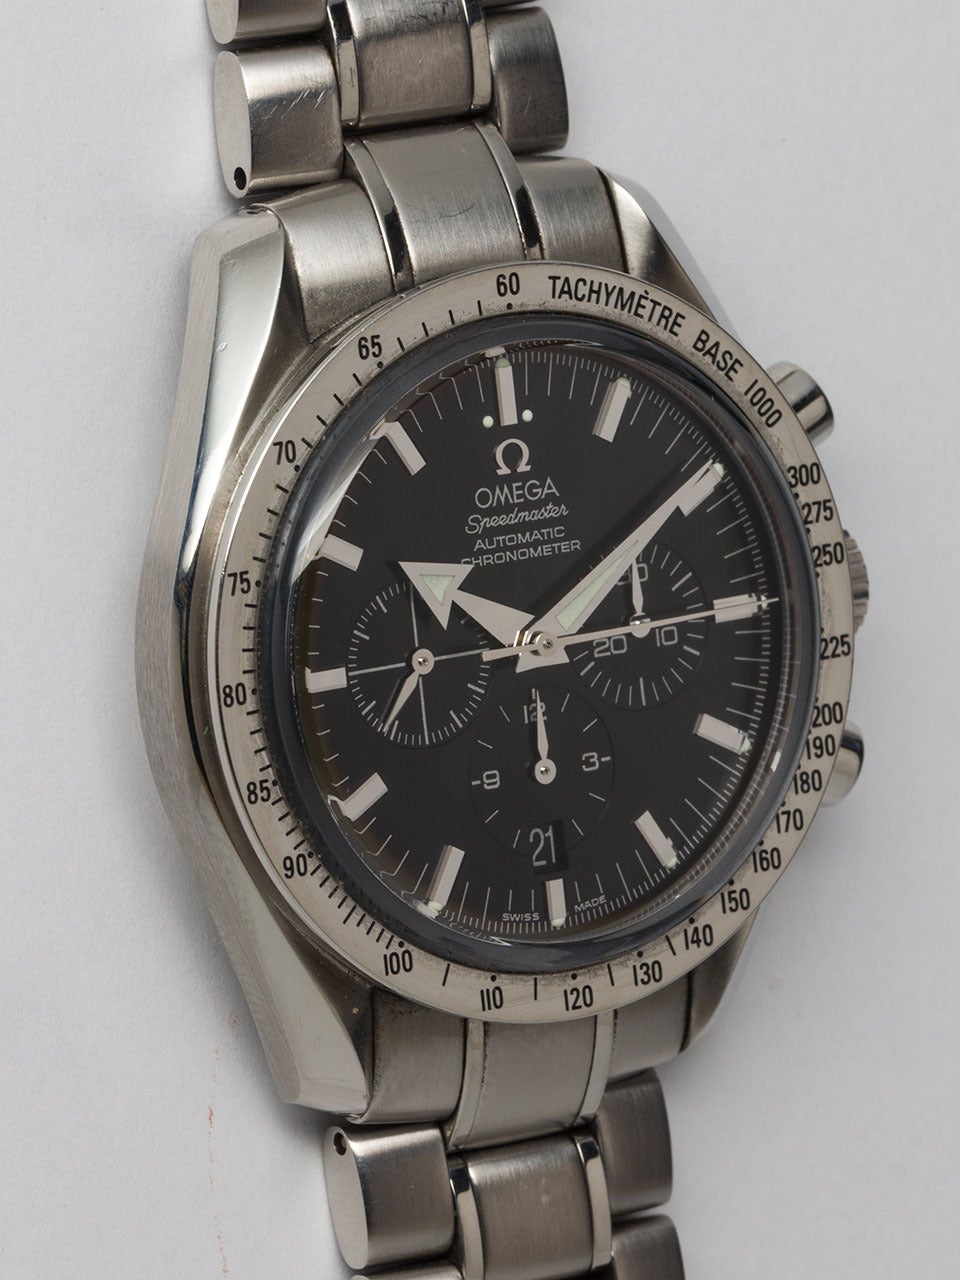 Omega Stainless Steel Speedmaster Chronometer case ref# 3551.50. This is the Speedmaster Broad Arrow Reissue circa 2000's. Featuring 42 x 47mm case with screw down back and wide brushed finish tachymetre bezel. Original black dial with thick silver